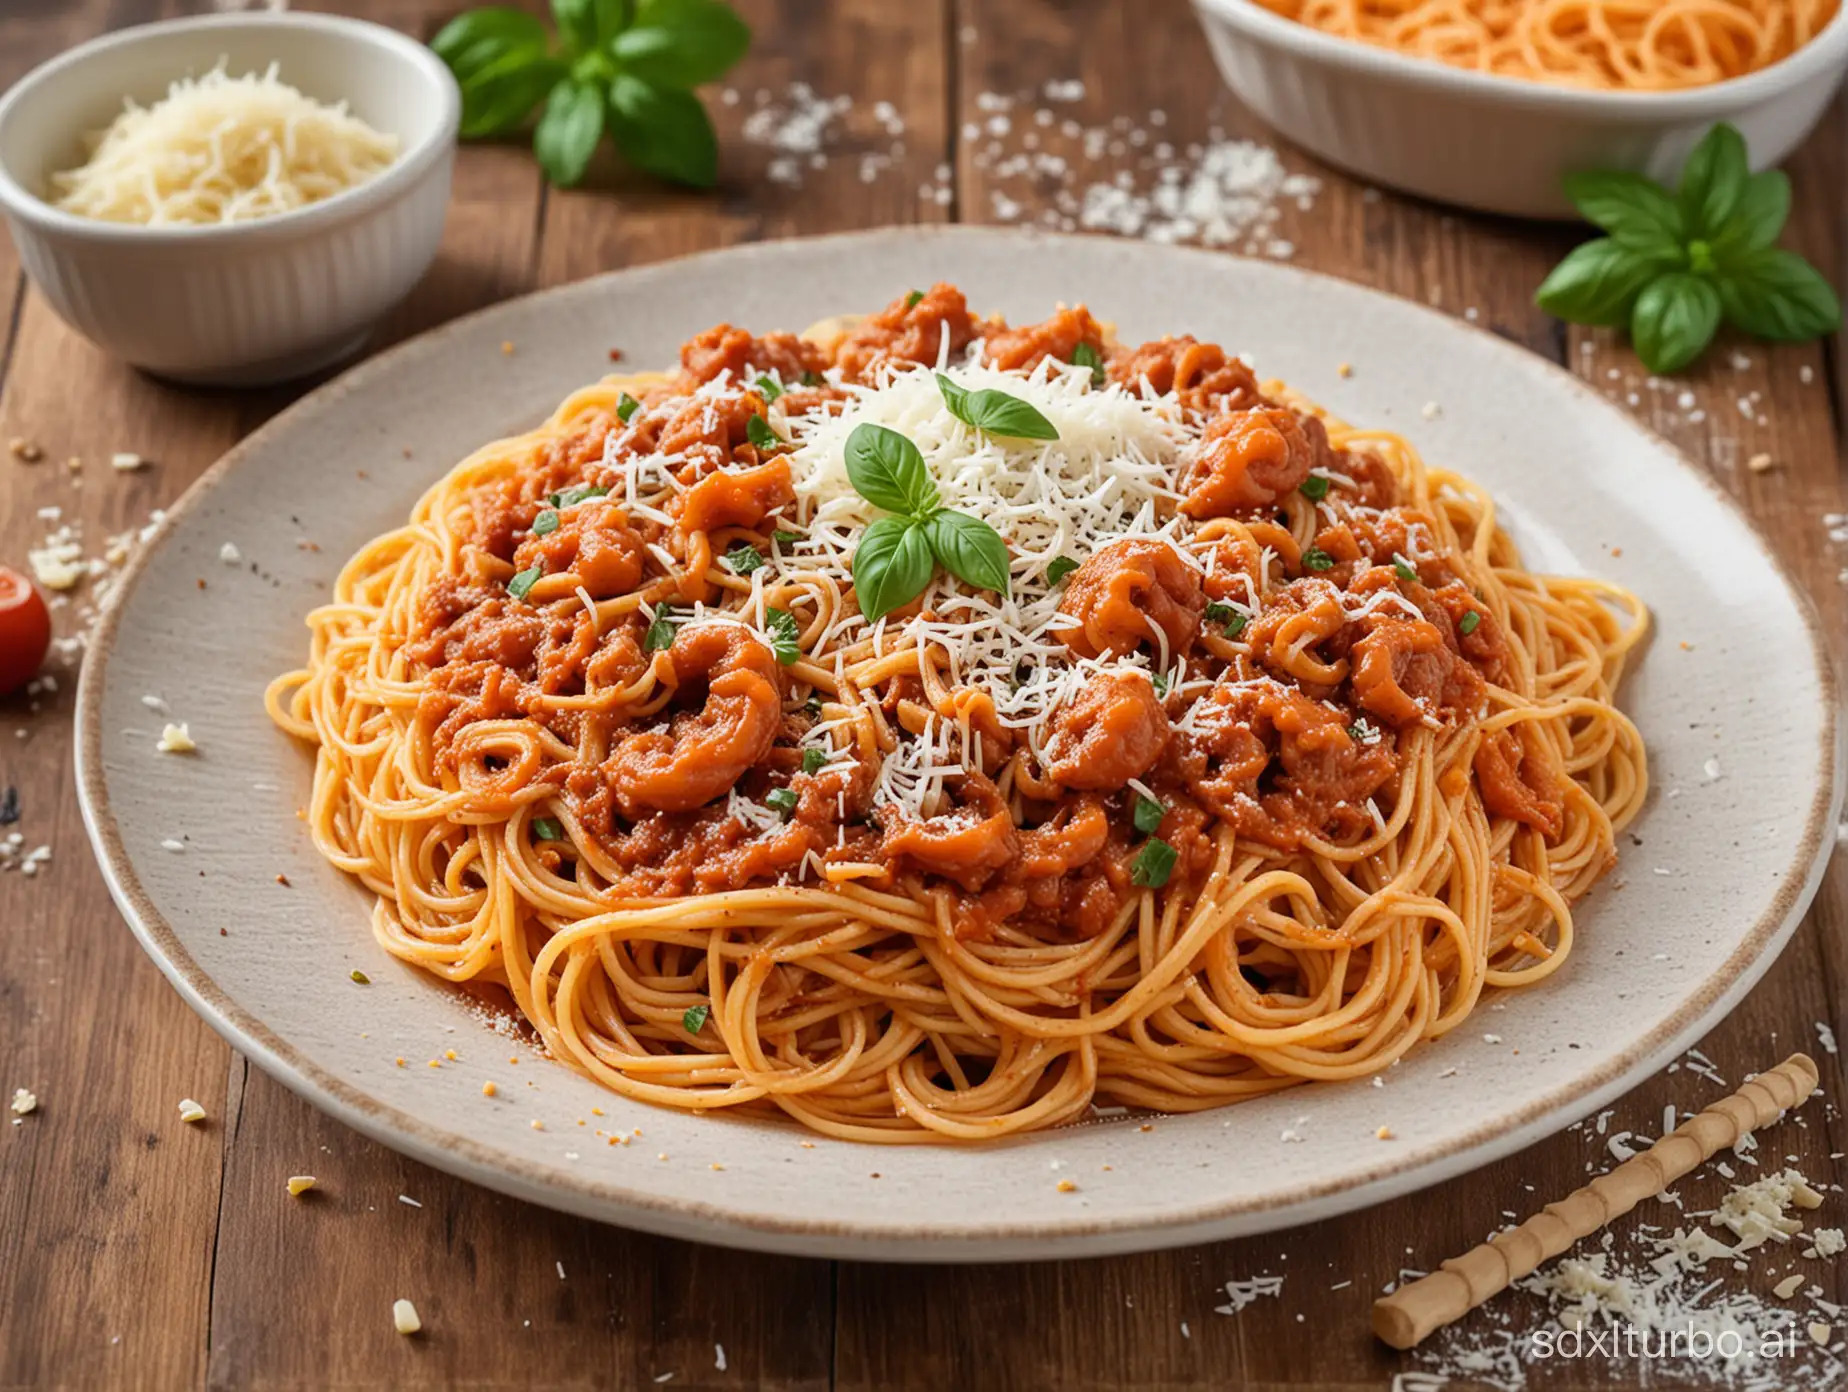 A plate of worm spaghetti, with each noodle wriggling and squirming in its own unique way, coated in a rich tomato sauce and topped with freshly grated parmesan cheese.